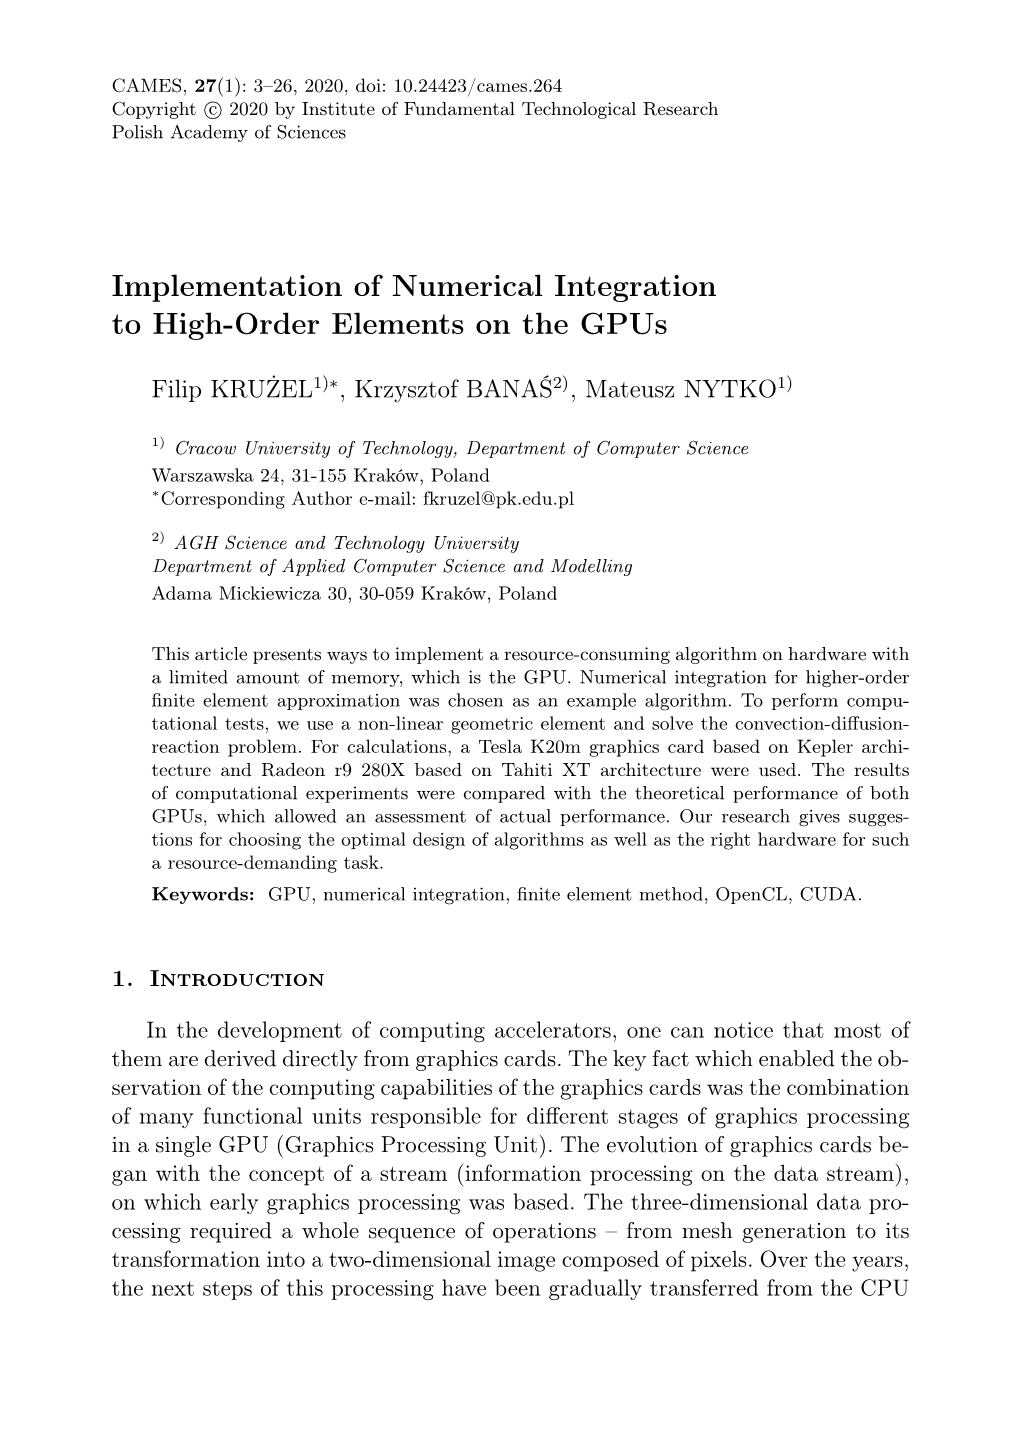 Implementation of Numerical Integration to High-Order Elements on the Gpus